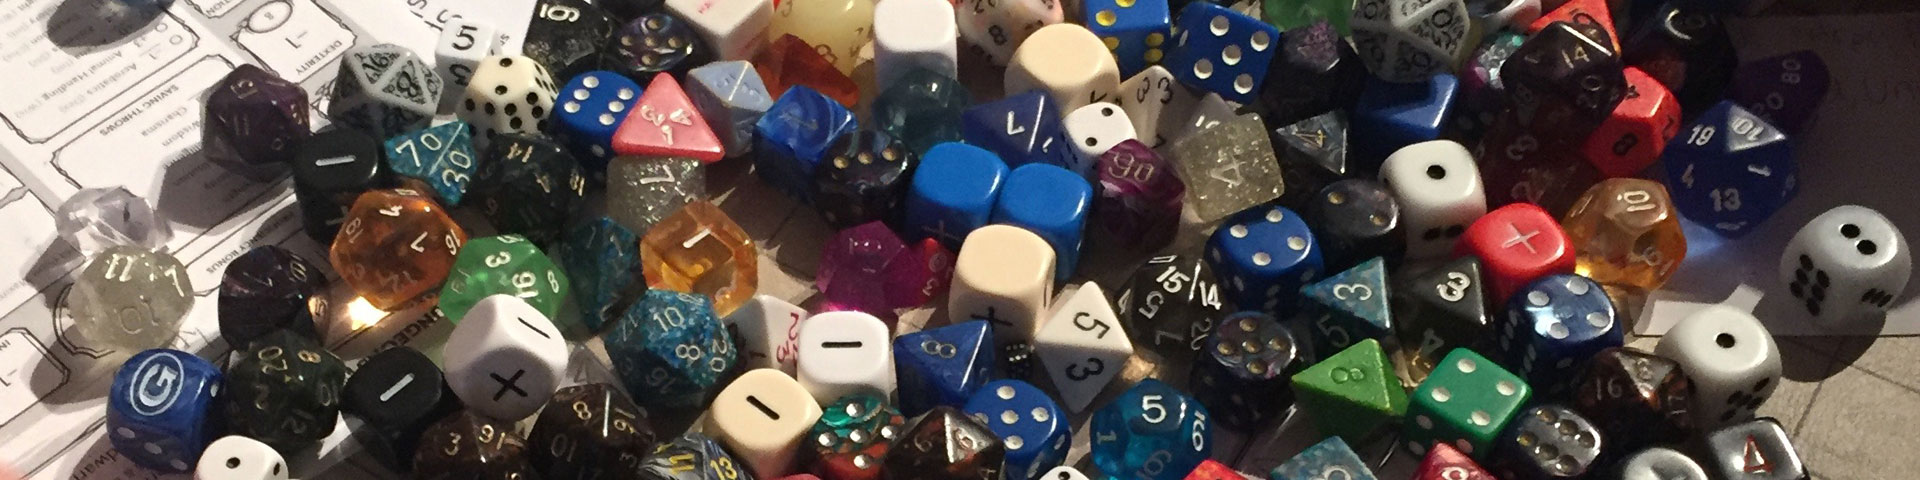 A close-up view of various polyhedral dice.